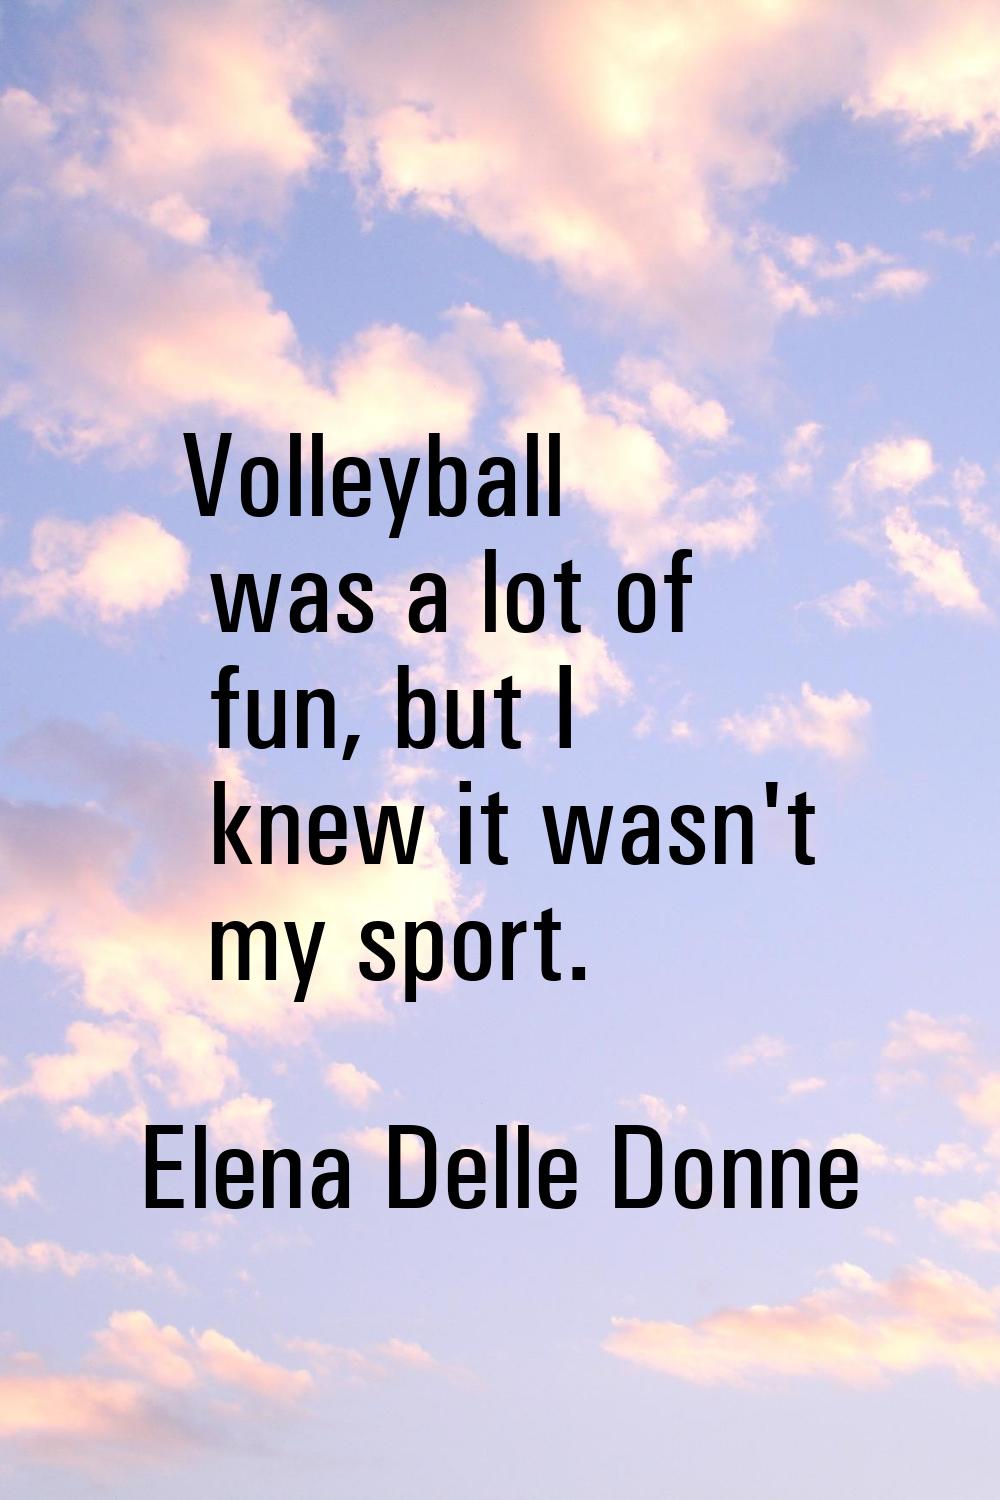 Volleyball was a lot of fun, but I knew it wasn't my sport.